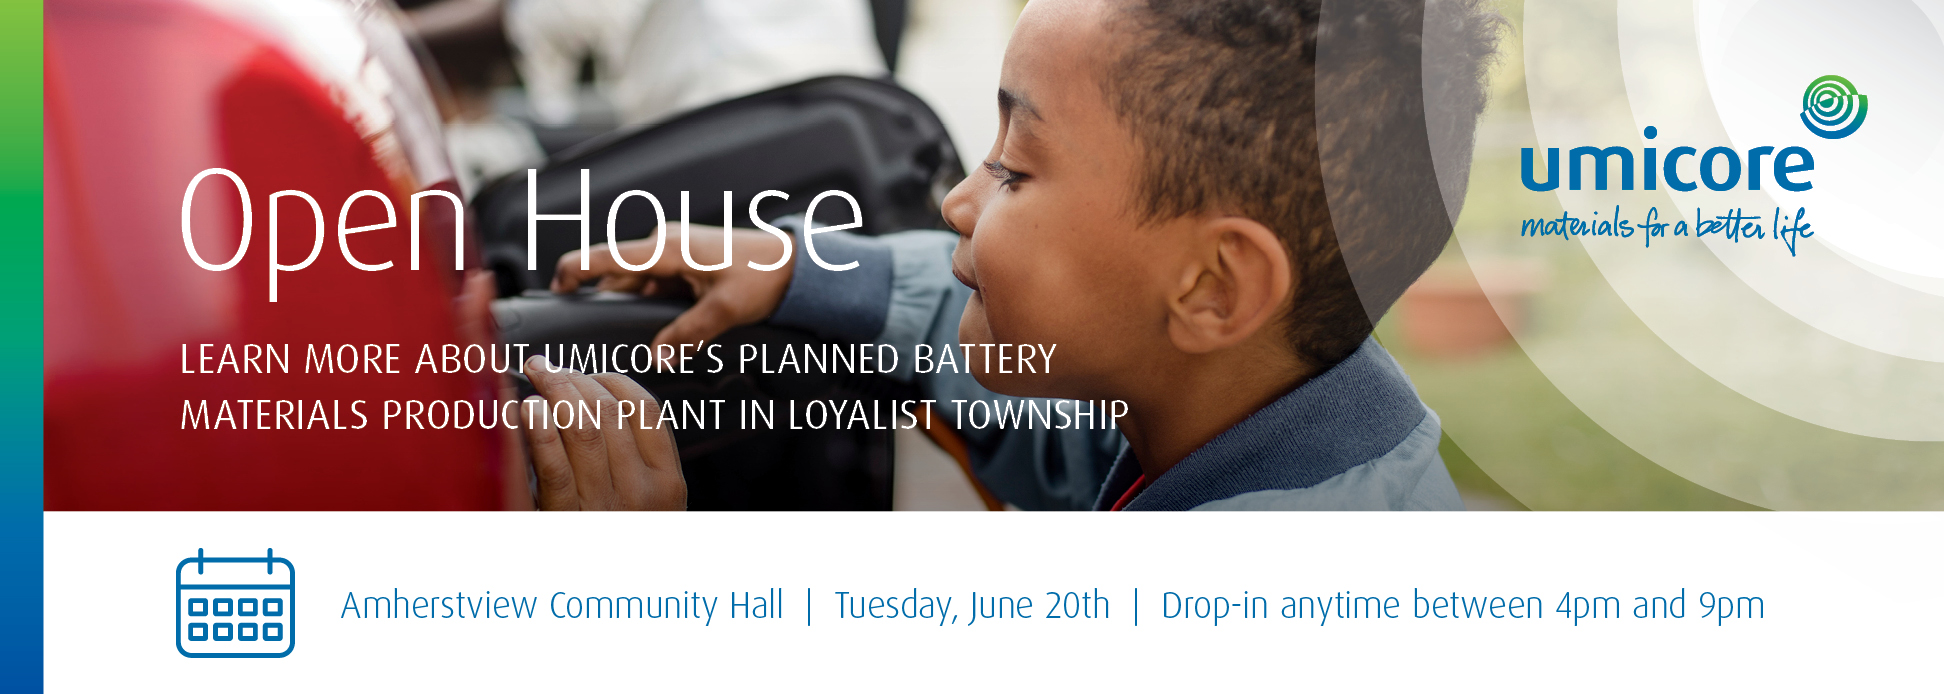 Graphic with image of child recharging EV and details about the Open House